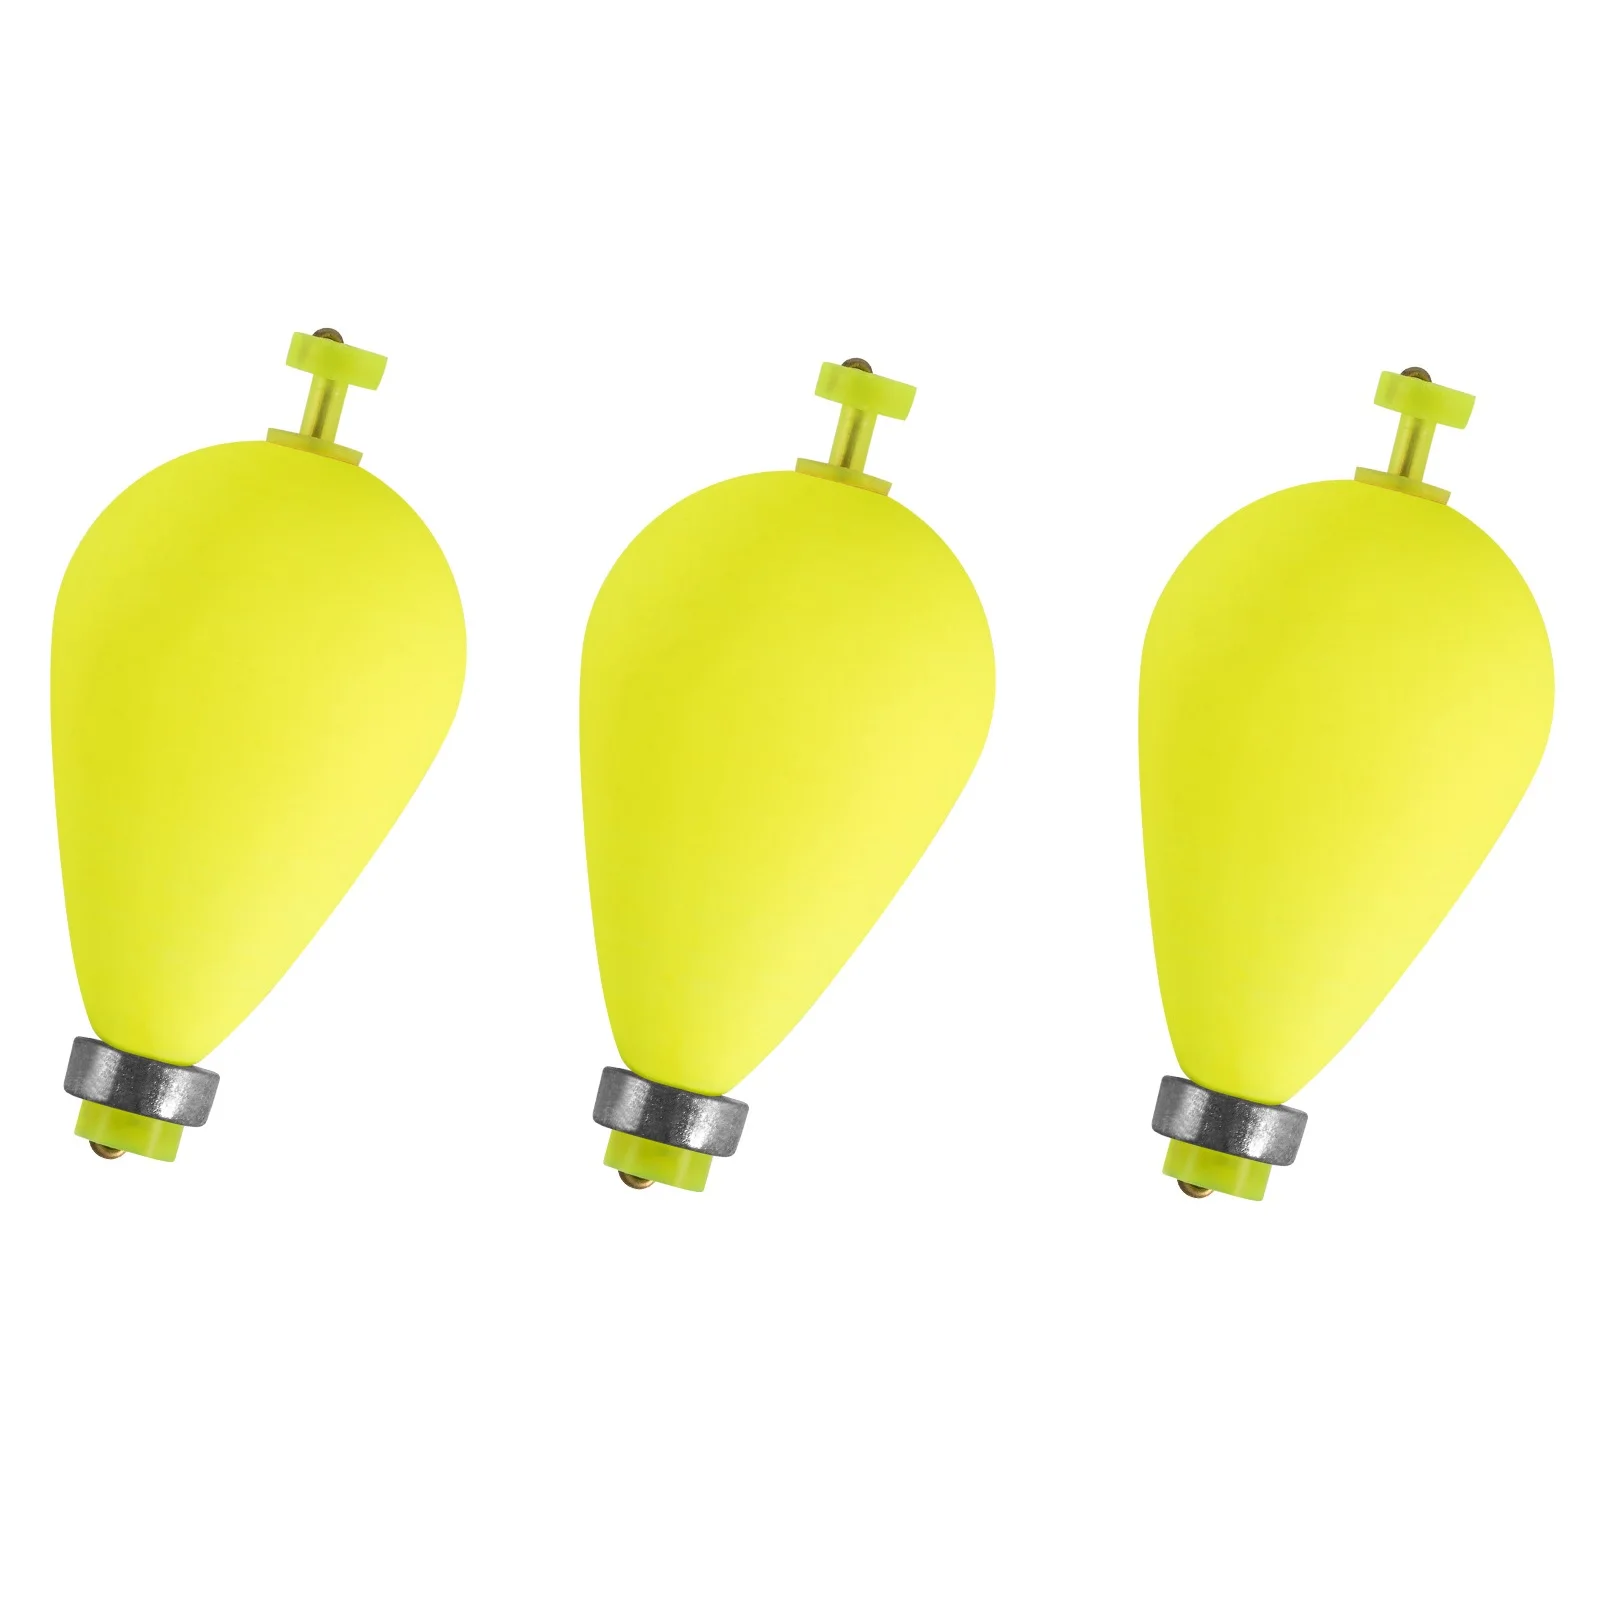 3pcs Fishing Weighted Bobbers Foam Floats Snap-on Pear Shape Buoy Bobber  Strike Indicator for Bottom Rig Bass Trout Crappie